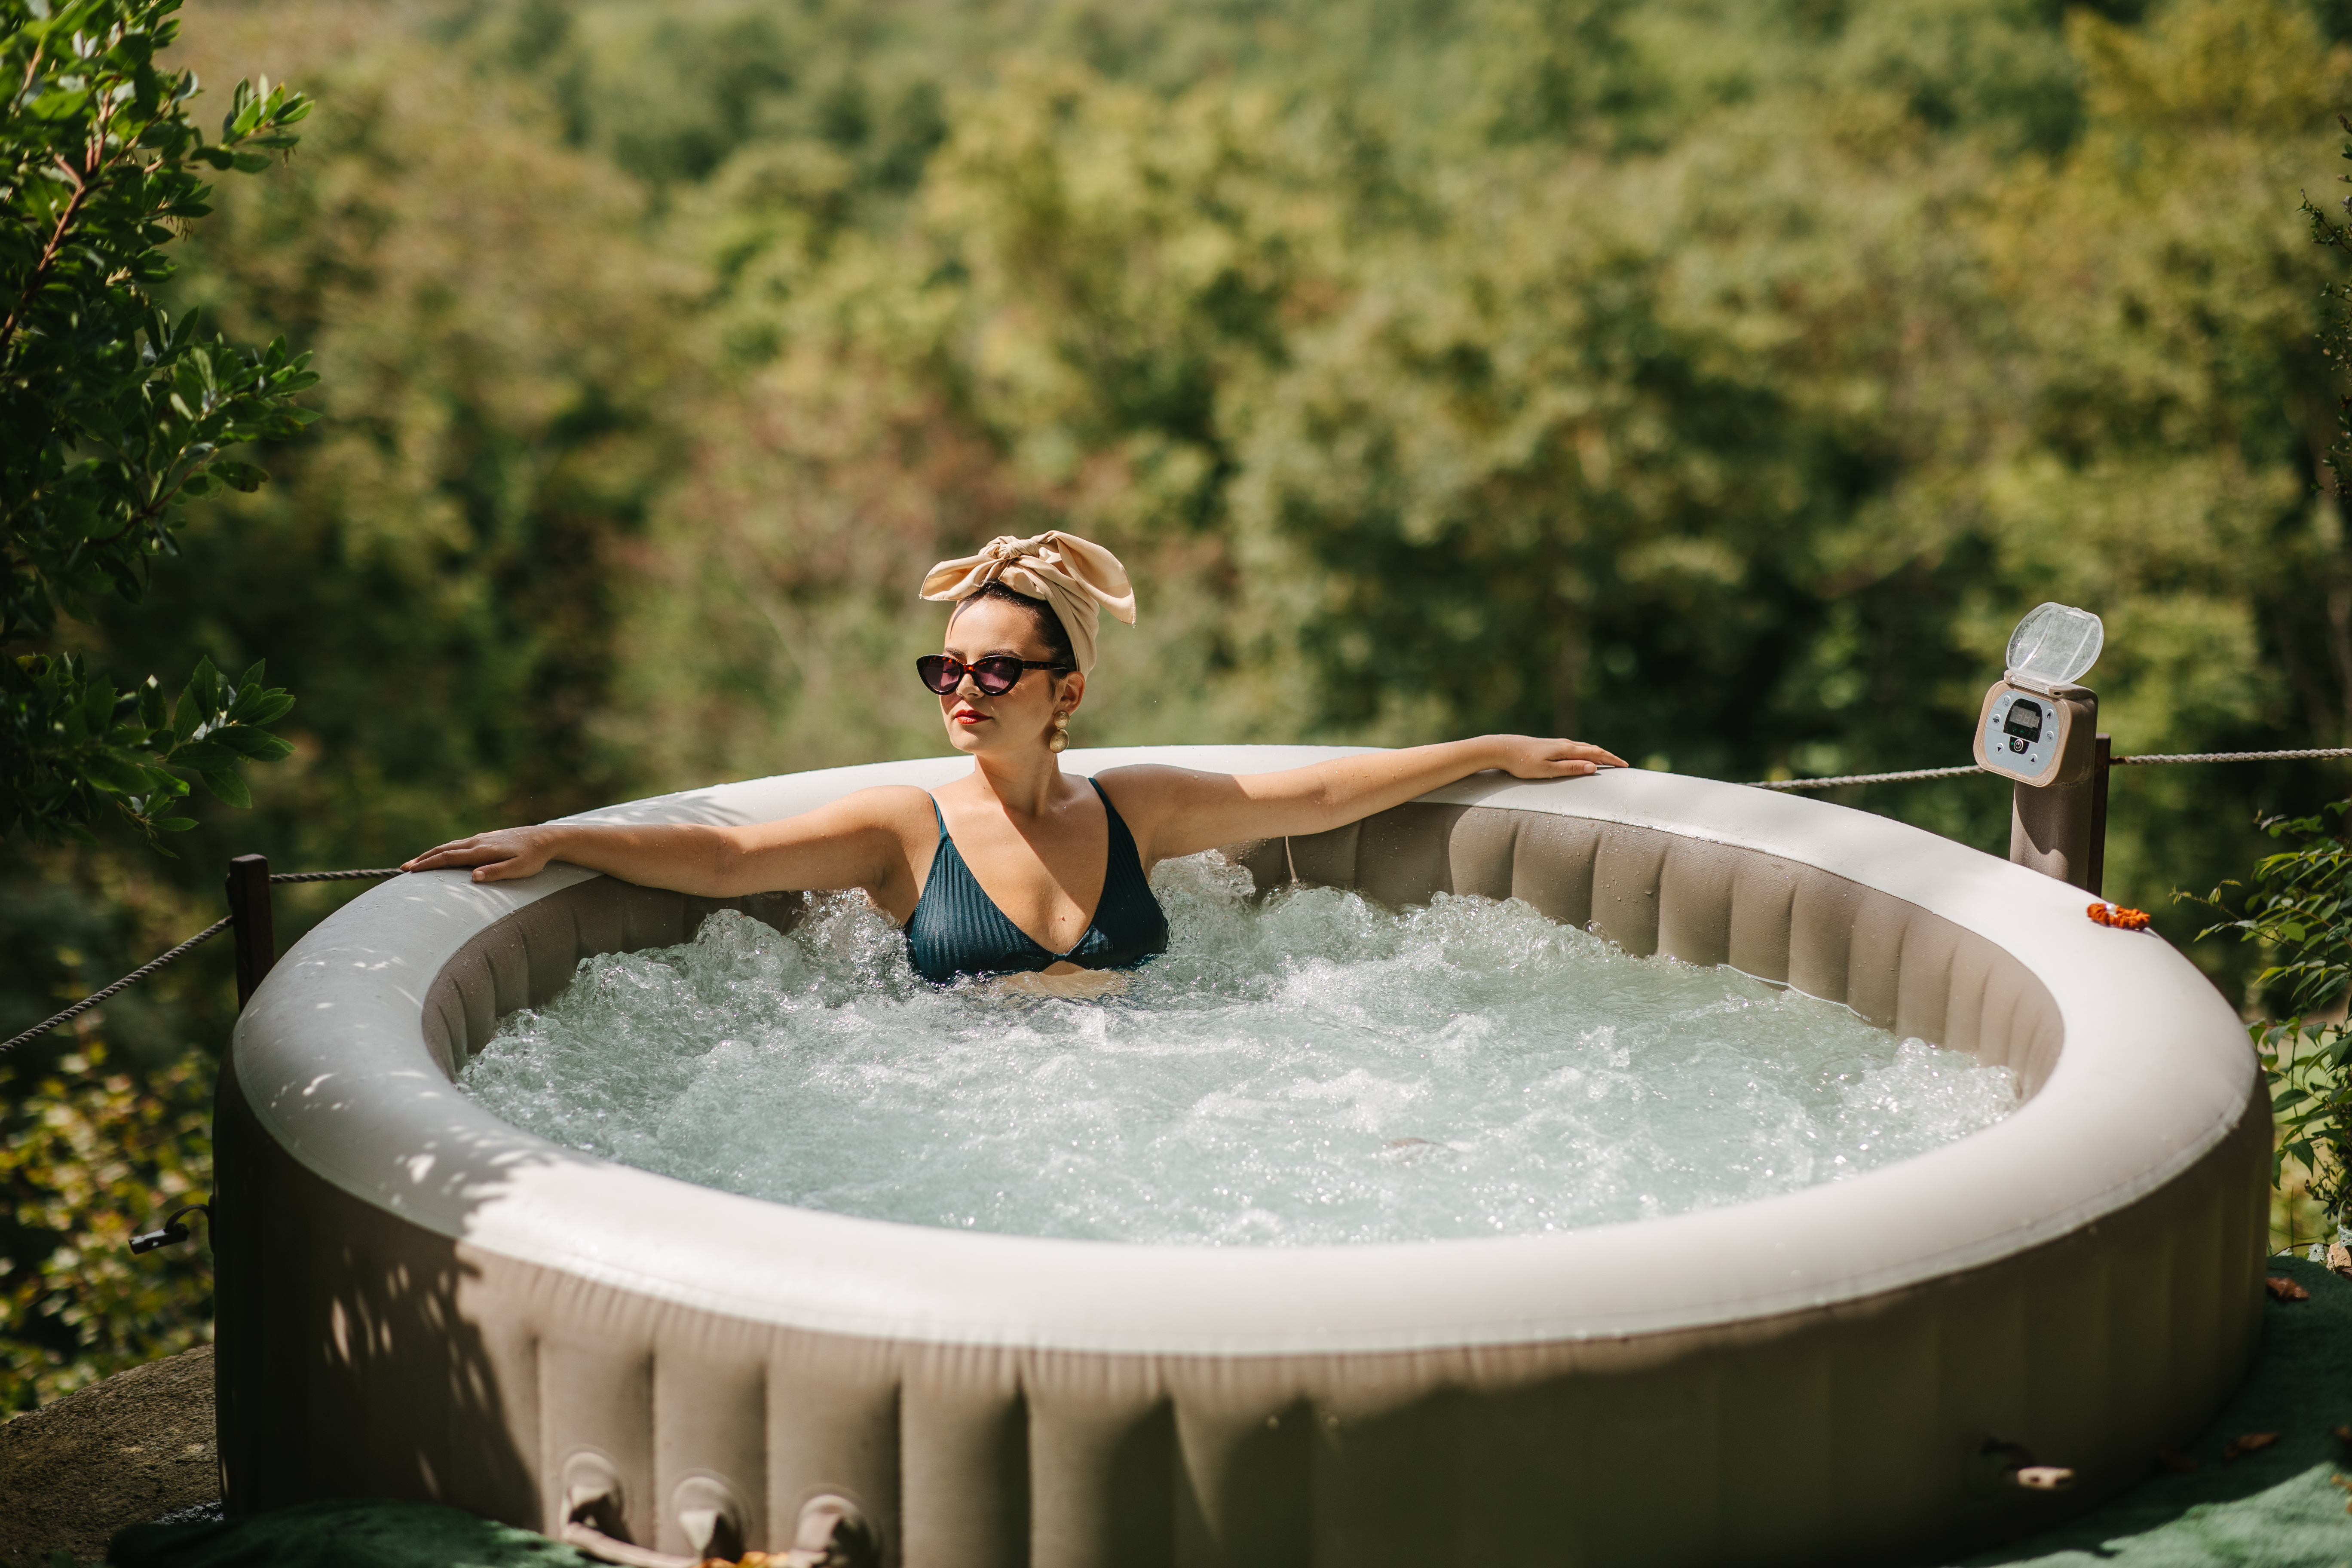 We've rounded up our pick of the best properties with hot tubs to rent in April and May - and prices start from £26pp a night.